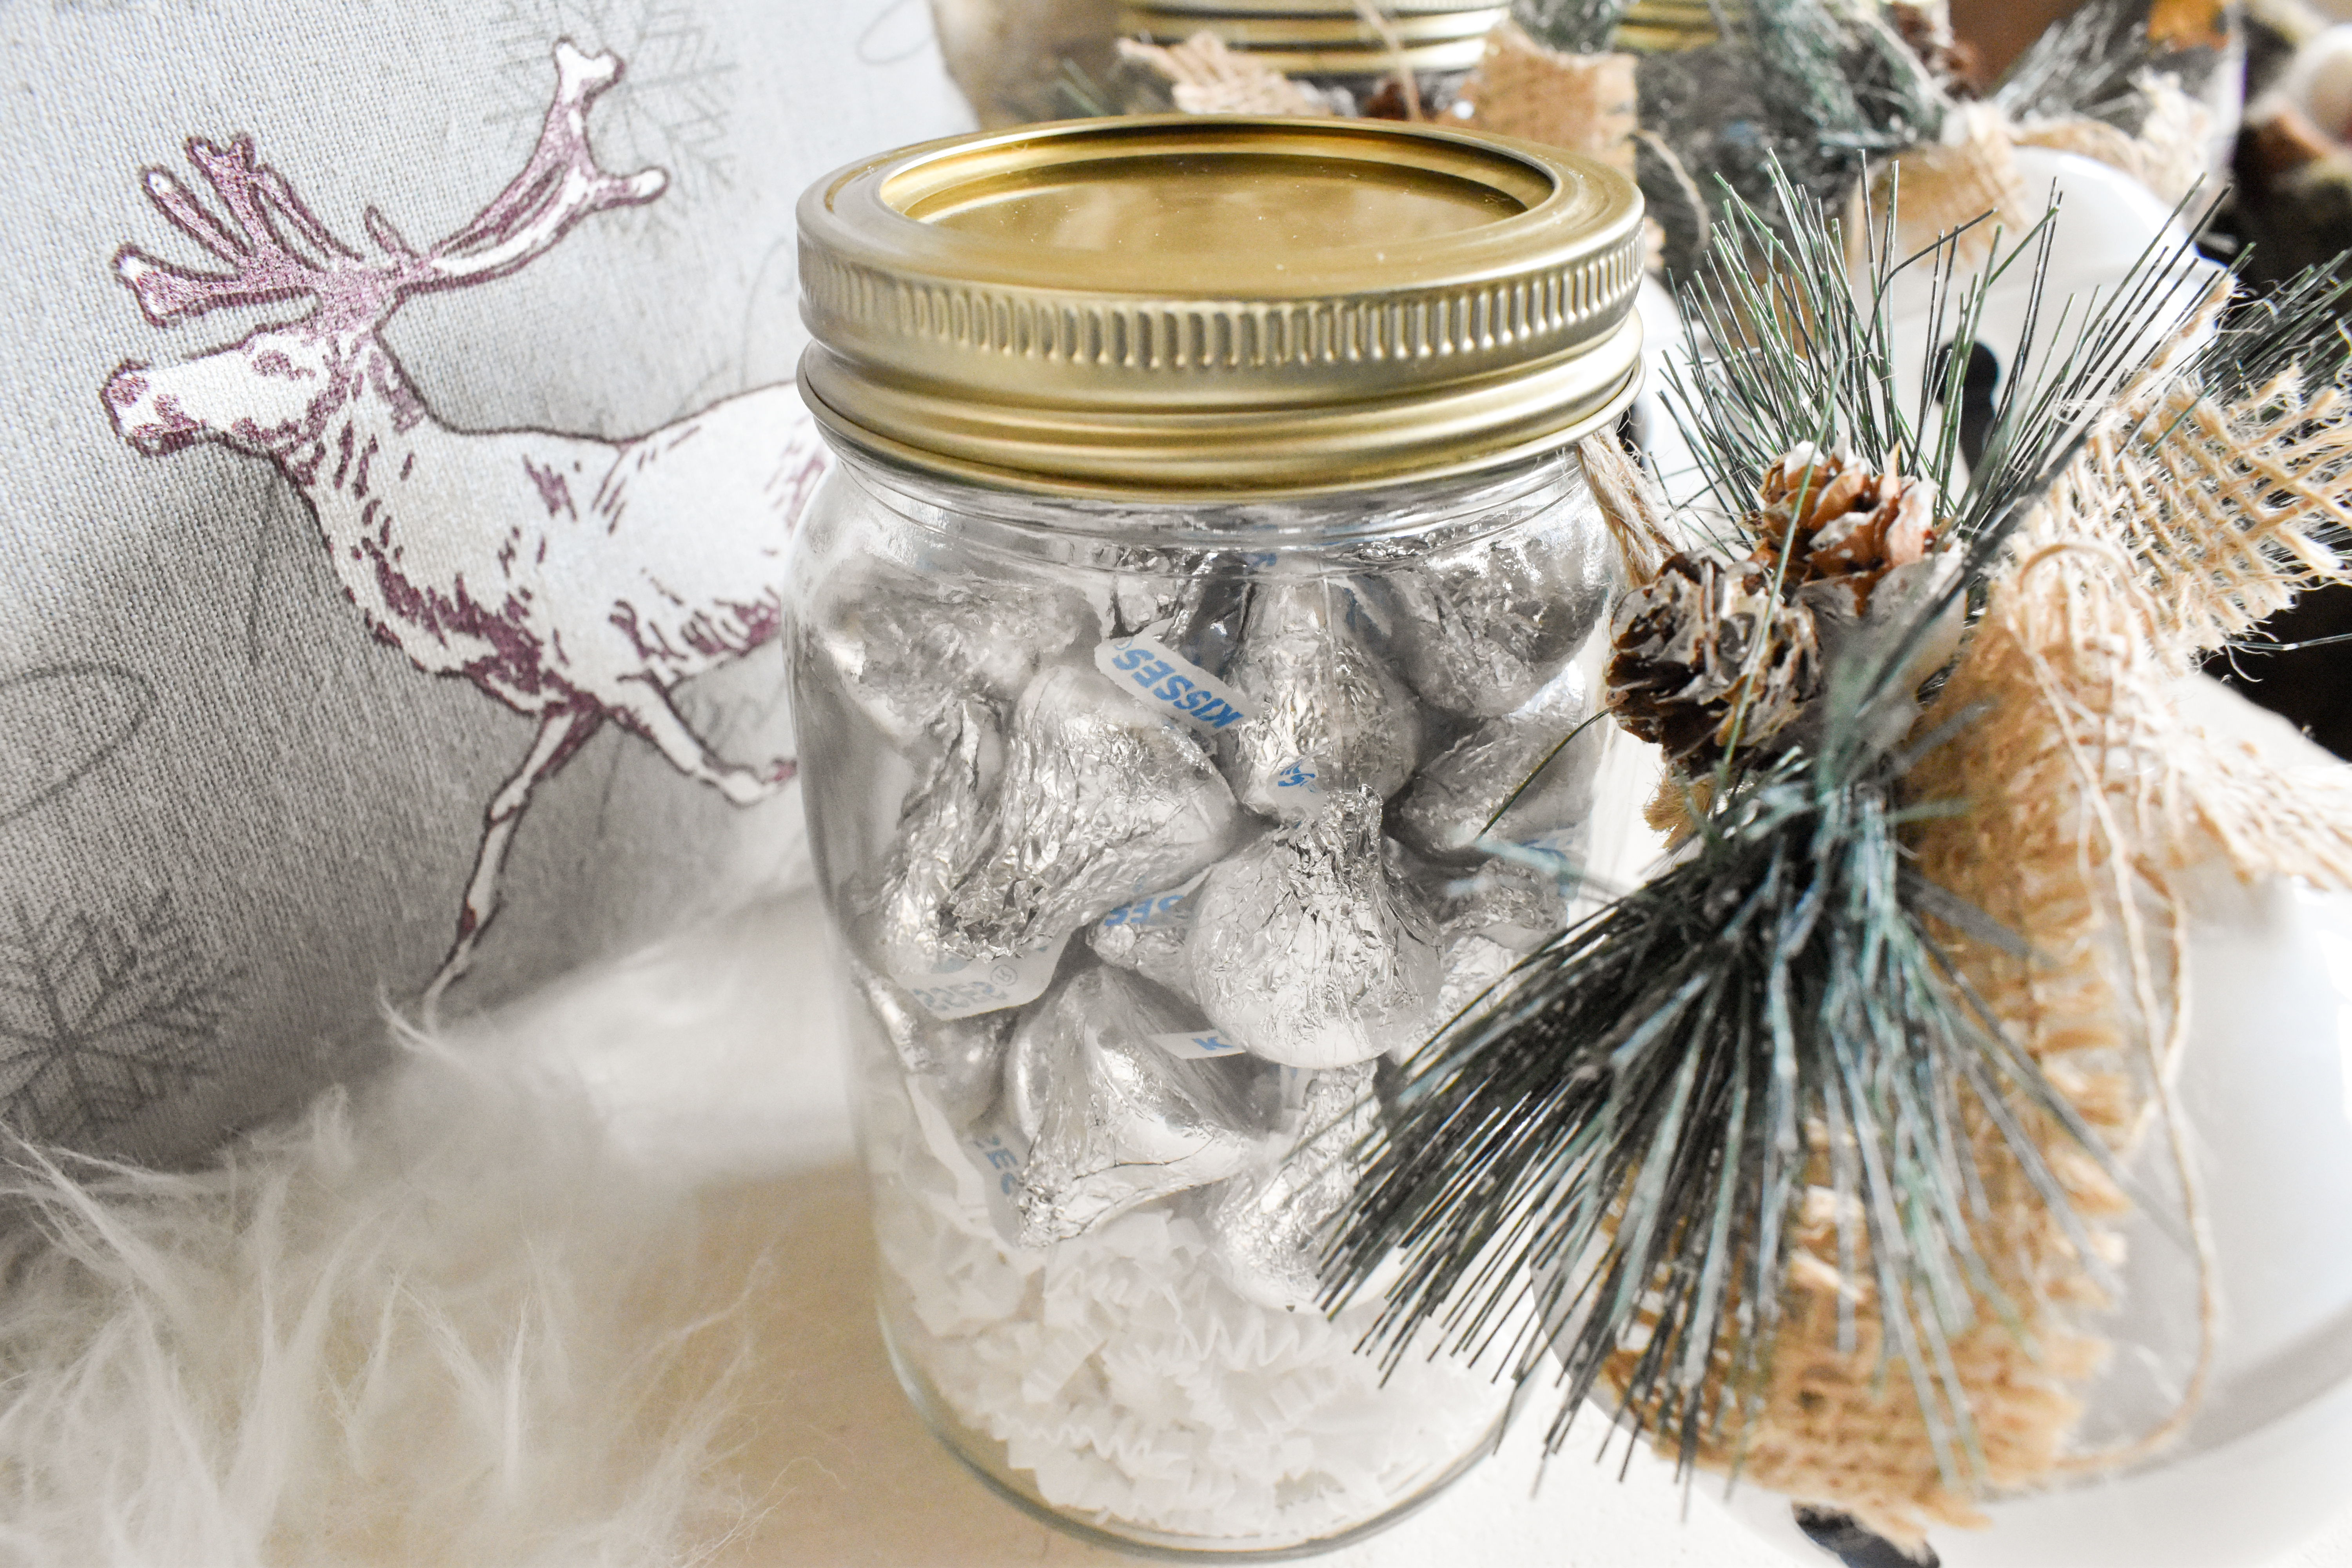 DIY Snowy Treat Jars | Cathedrals and Cafes